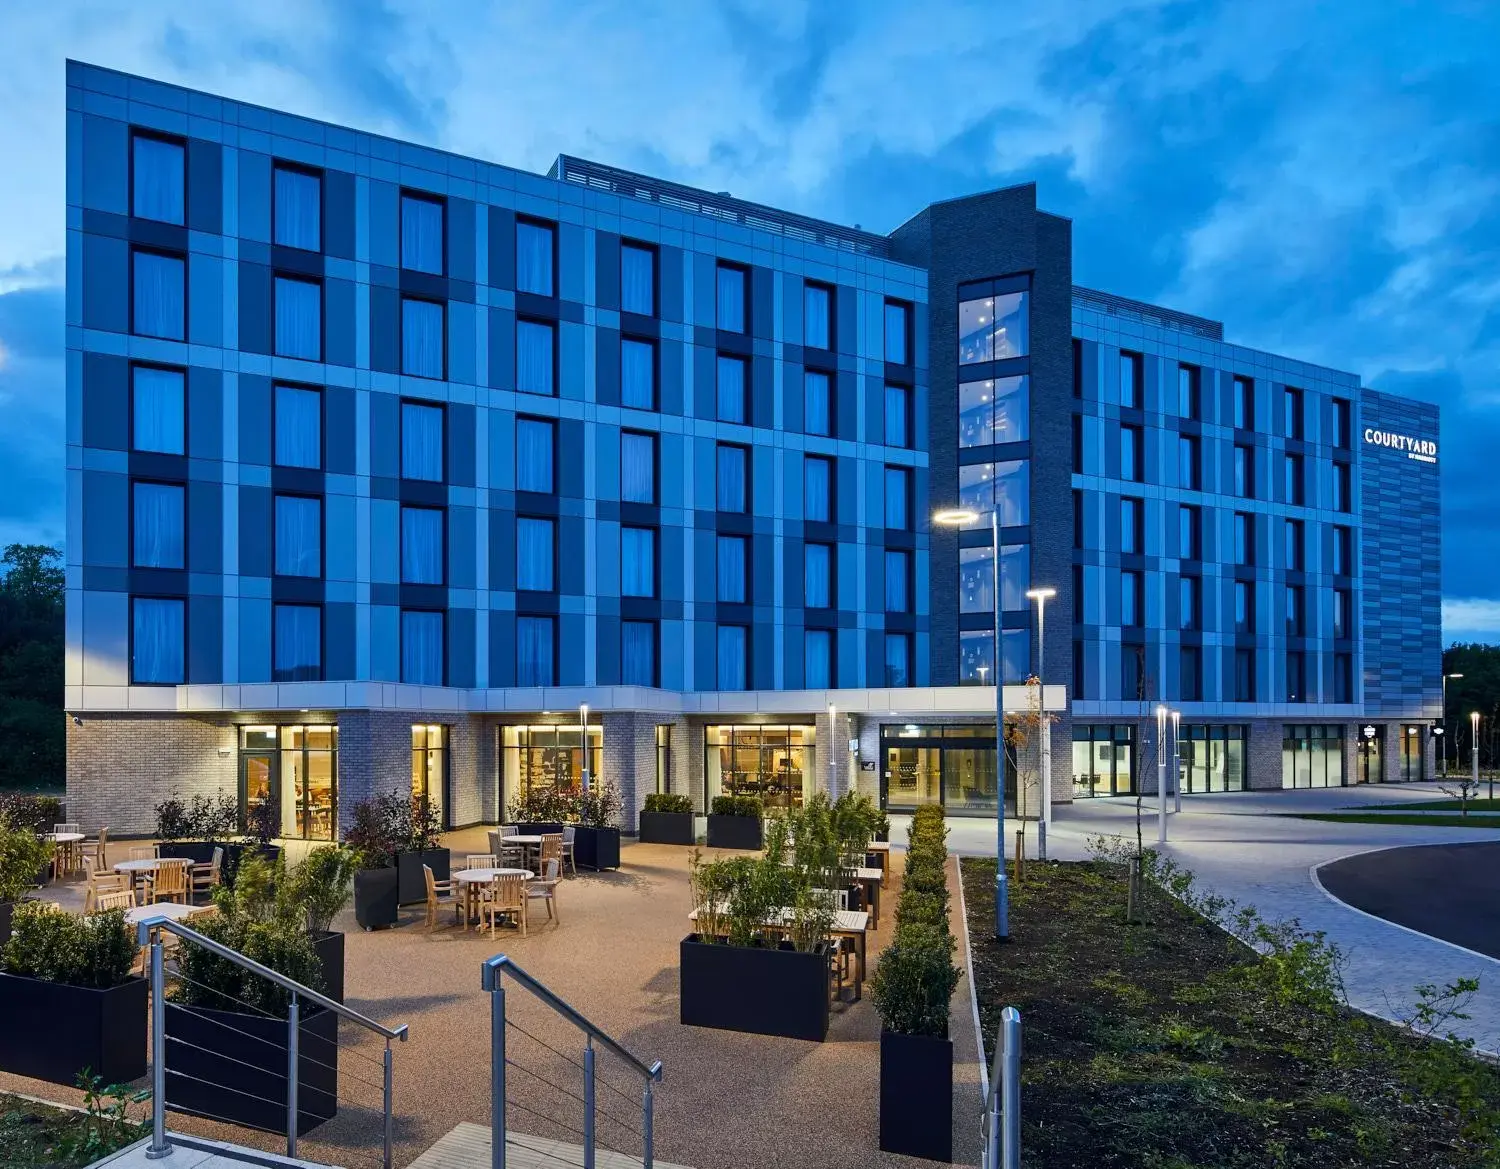 Property Building in Courtyard by Marriott Keele Staffordshire